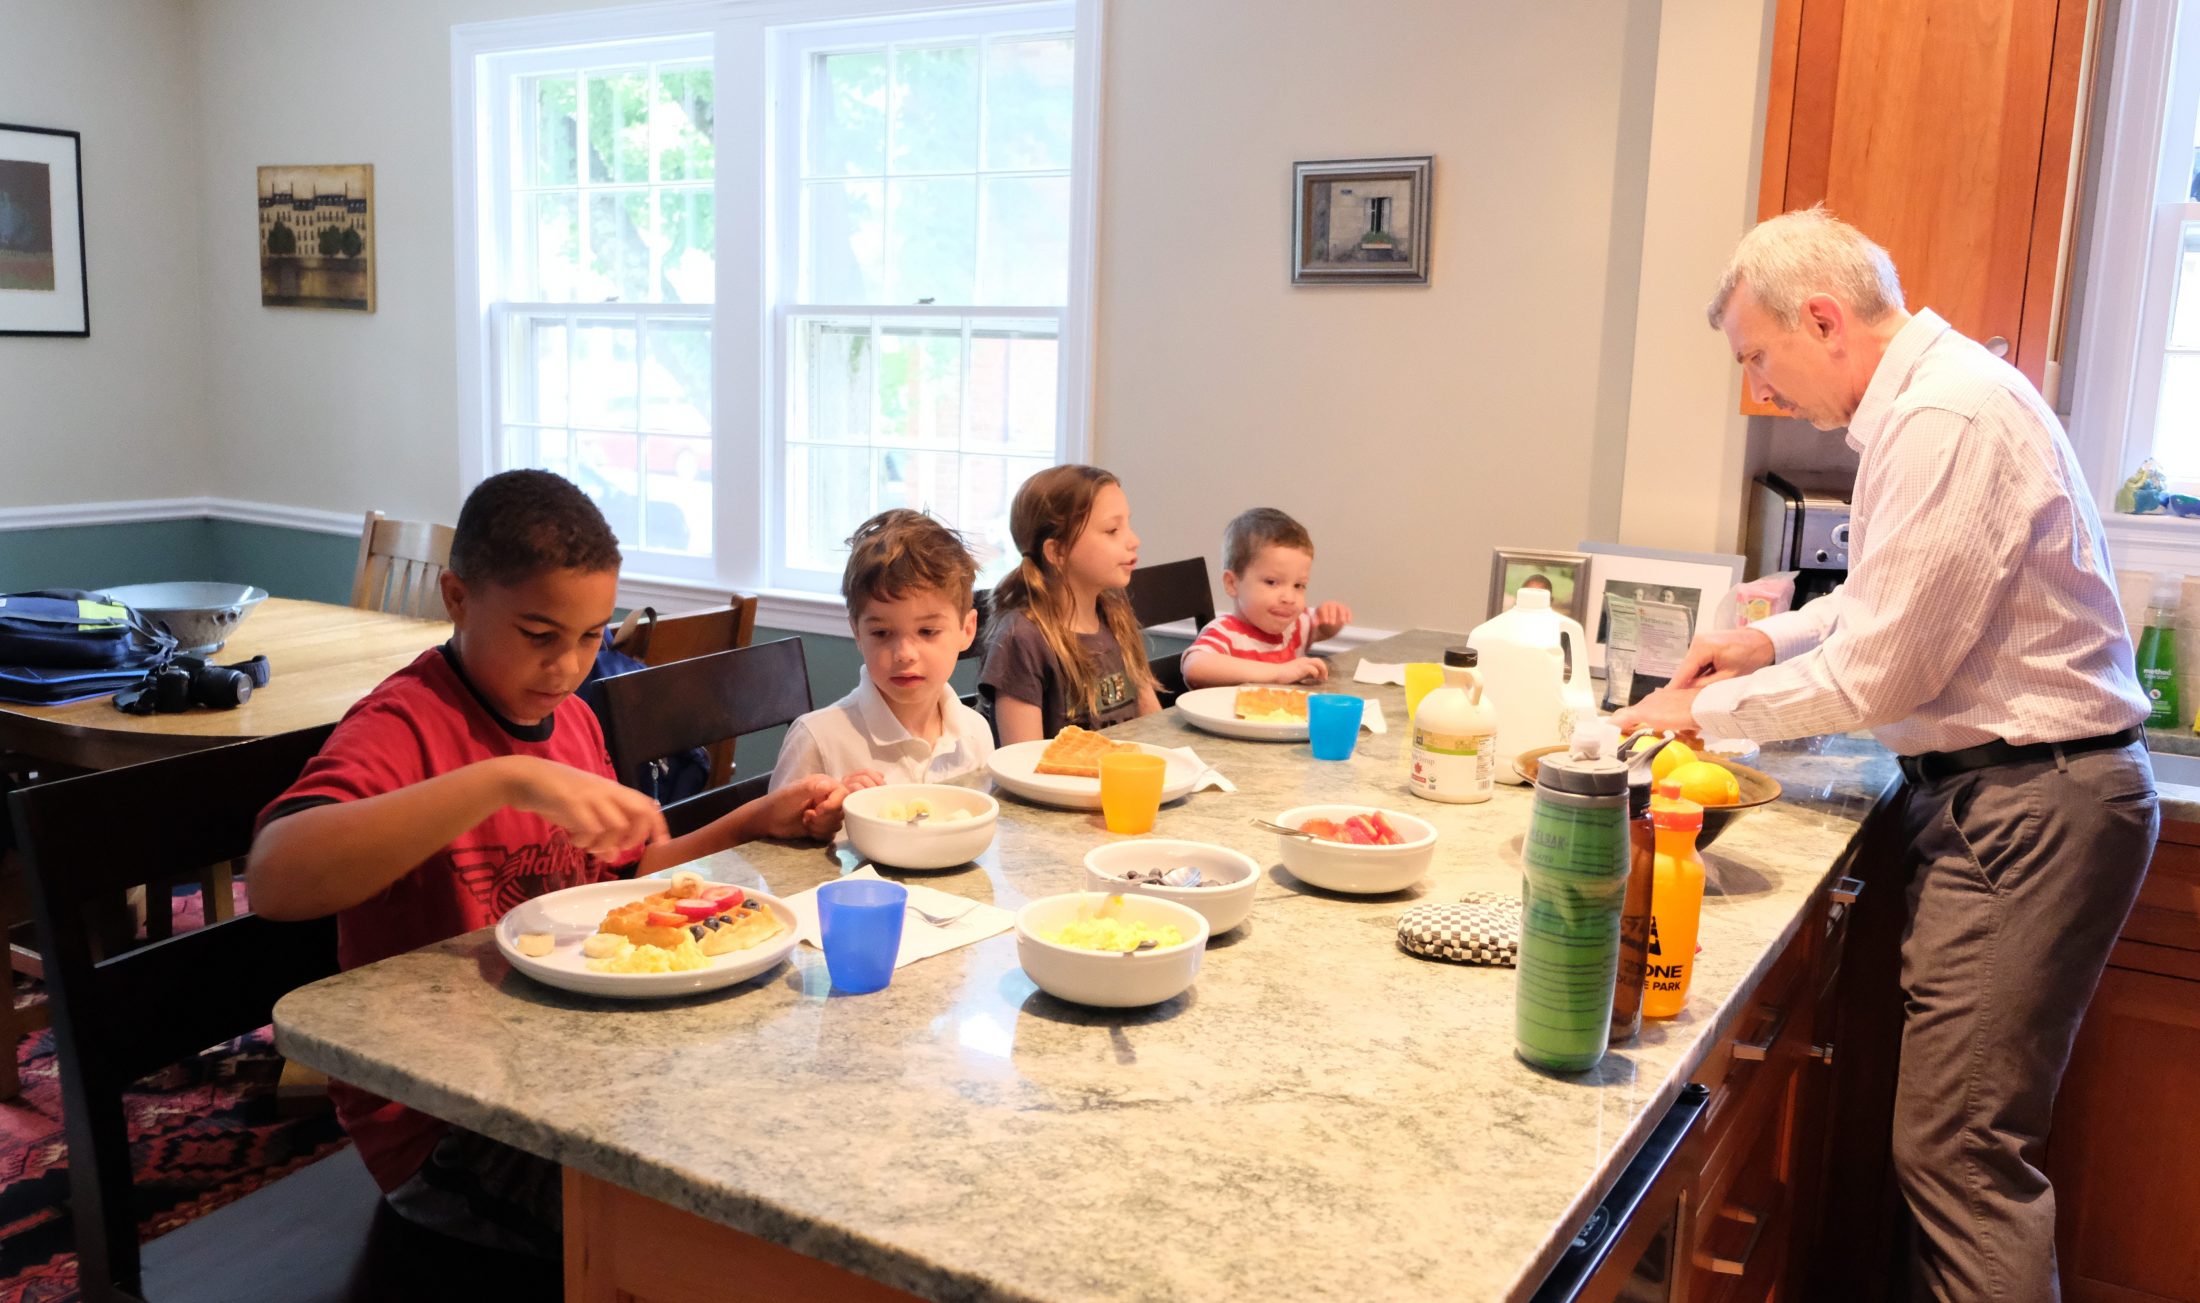 DC widow blog writer Marjorie Brimley's children eat with neighbor family at counter